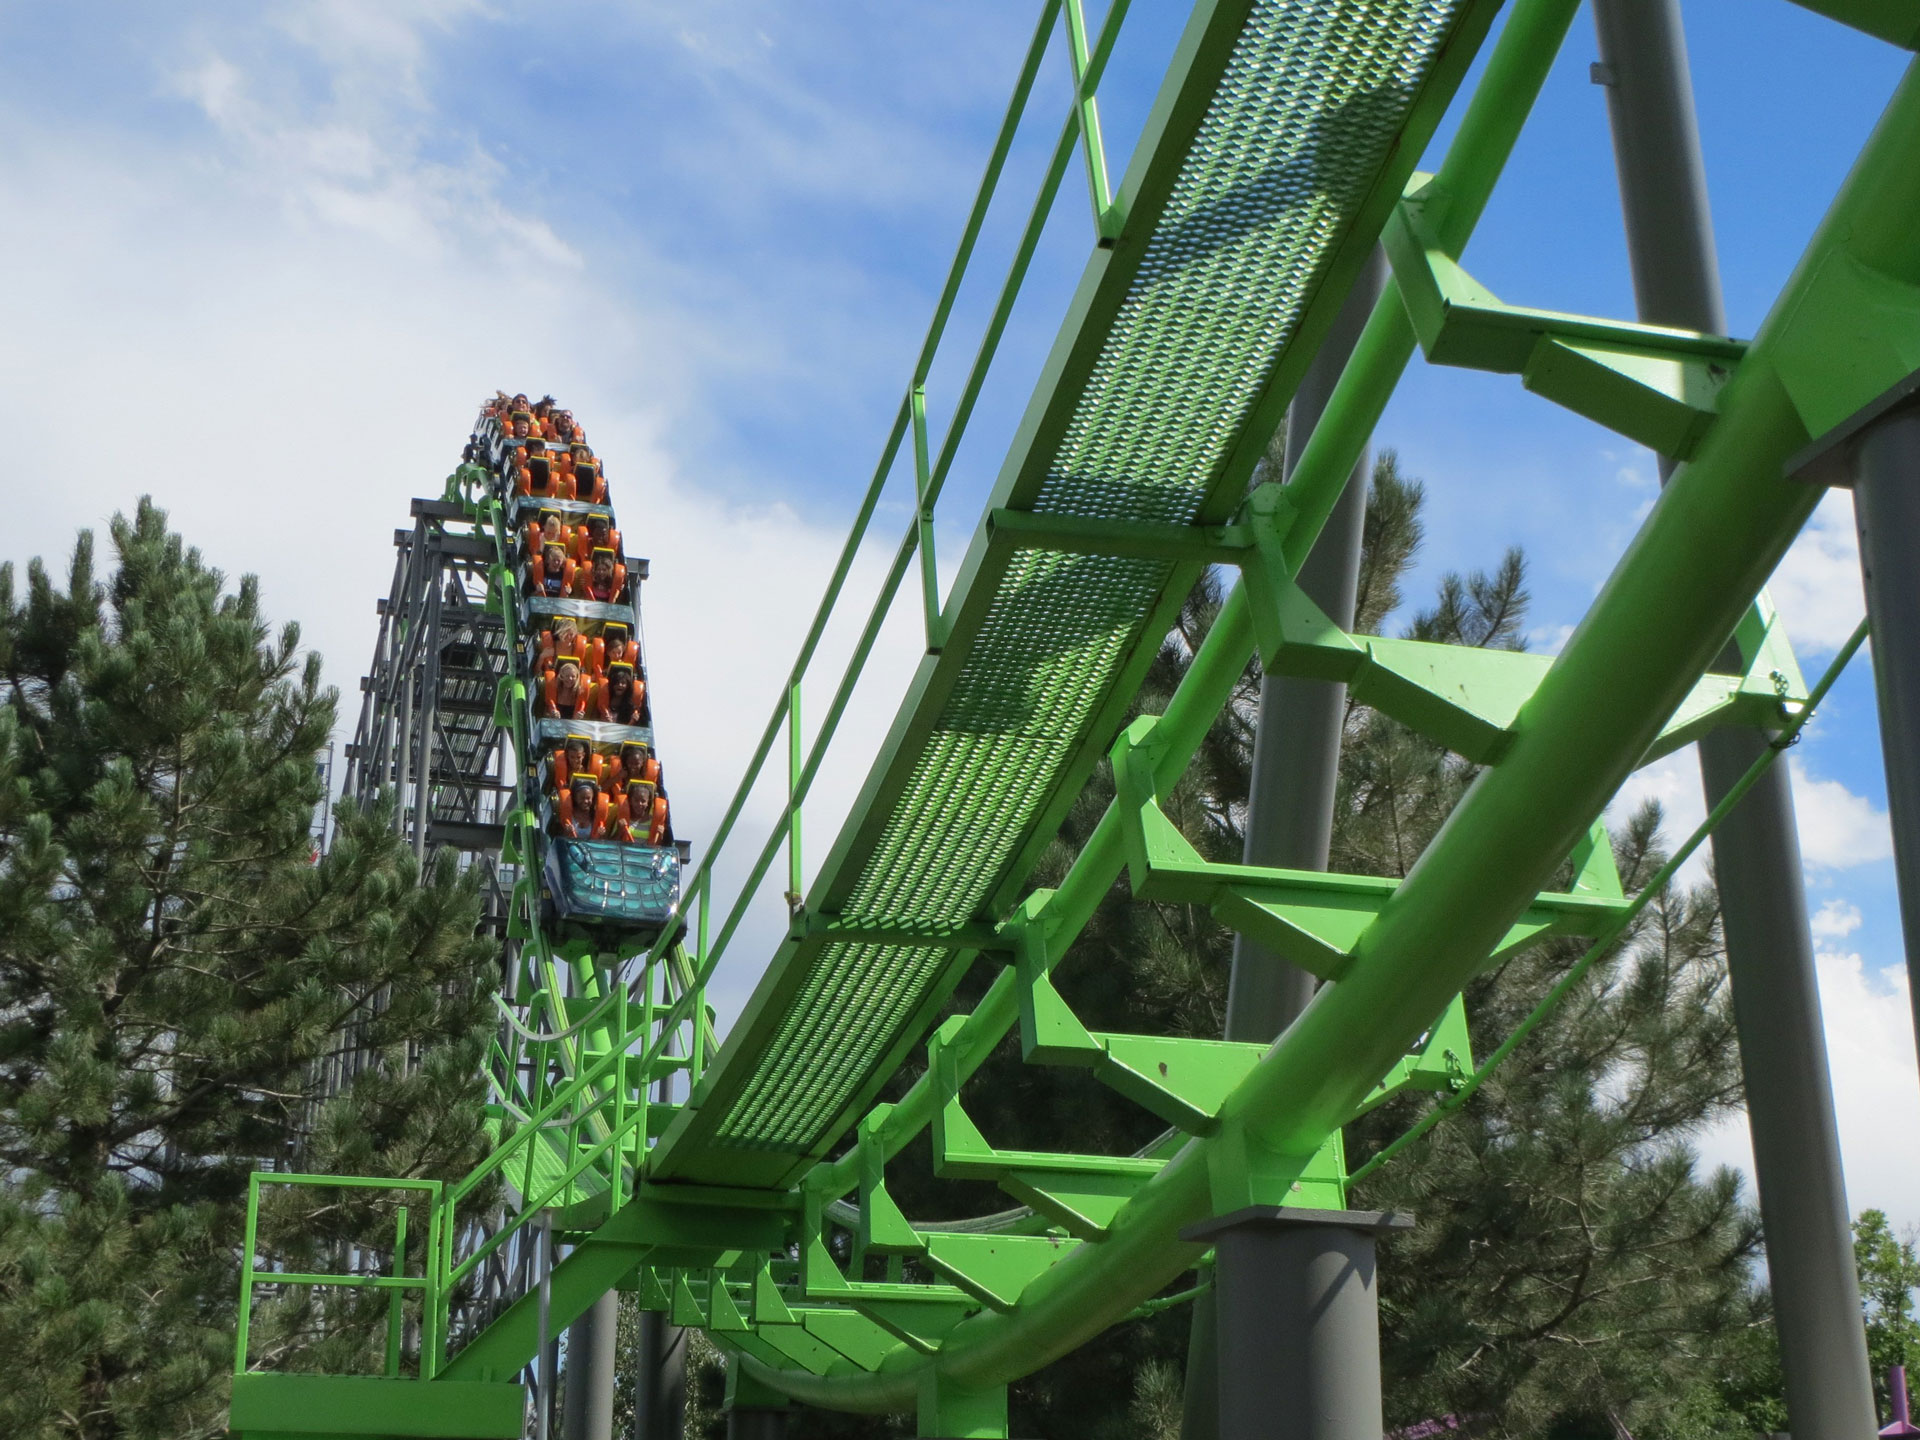 CATAPULT LAUNCH COASTERS - COASTERFORCE